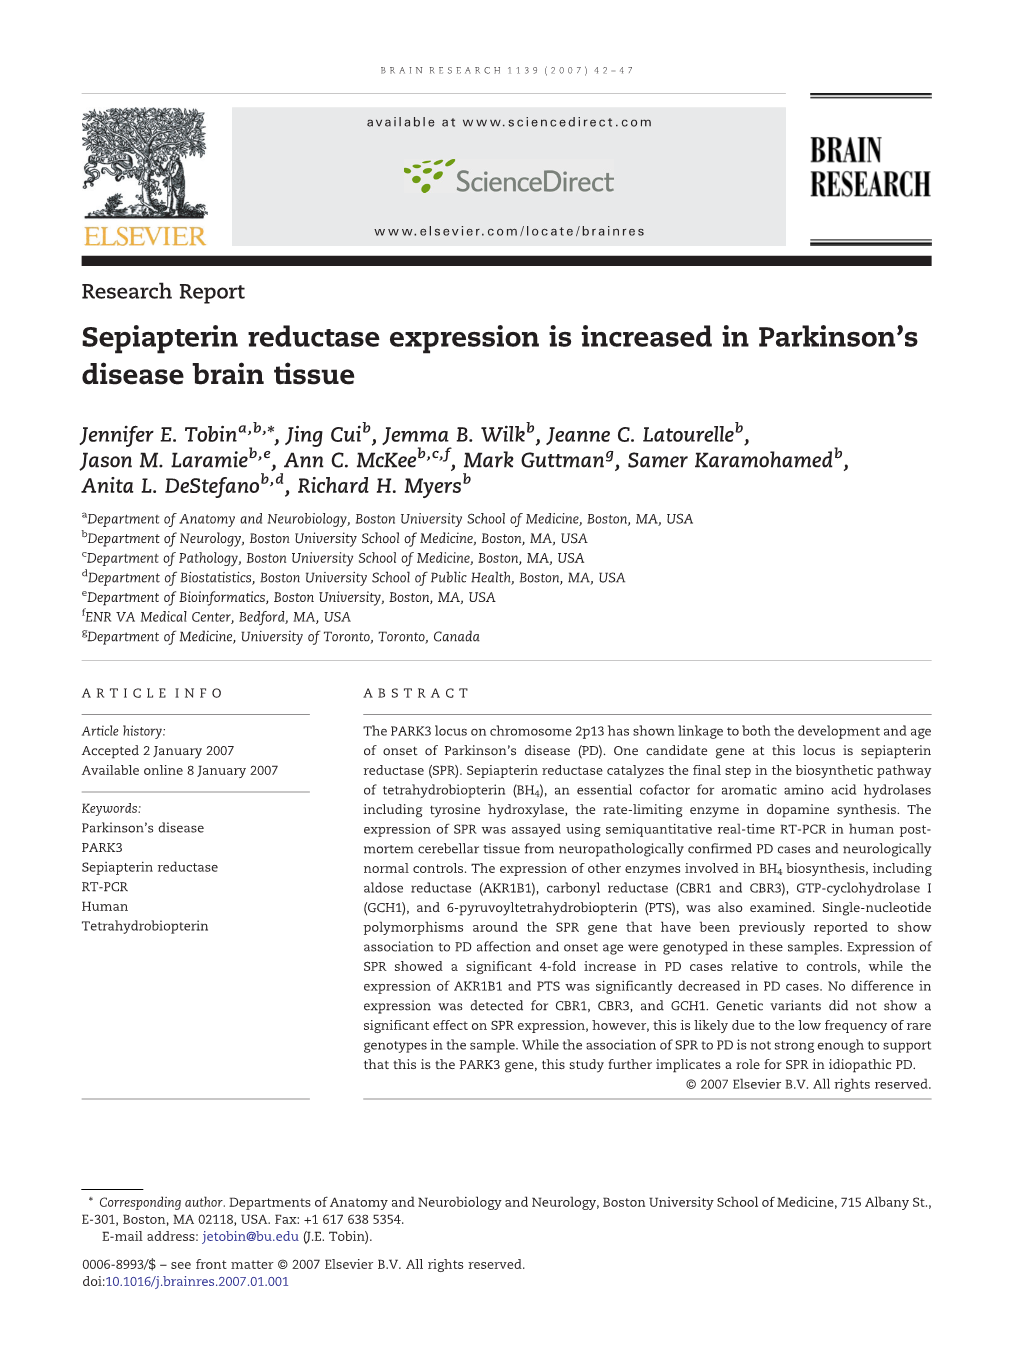 Sepiapterin Reductase Expression Is Increased in Parkinson's Disease Brain Tissue